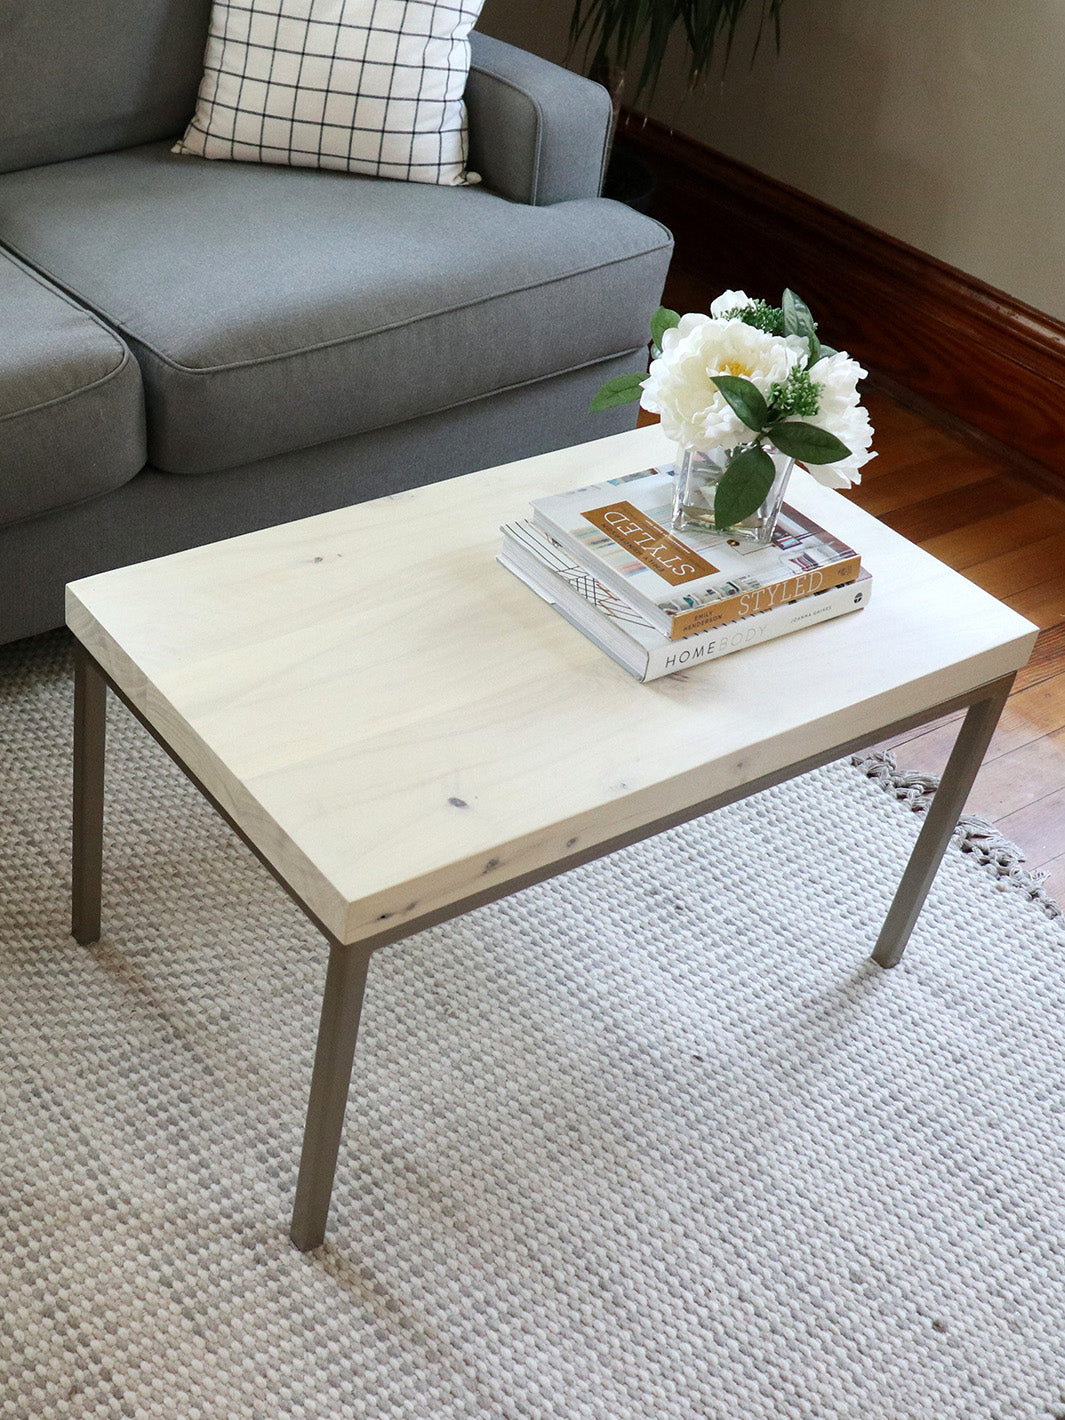 Modern White Maple Coffee Table with Gold Metal Base Earthly Comfort Coffee Tables 1164-8